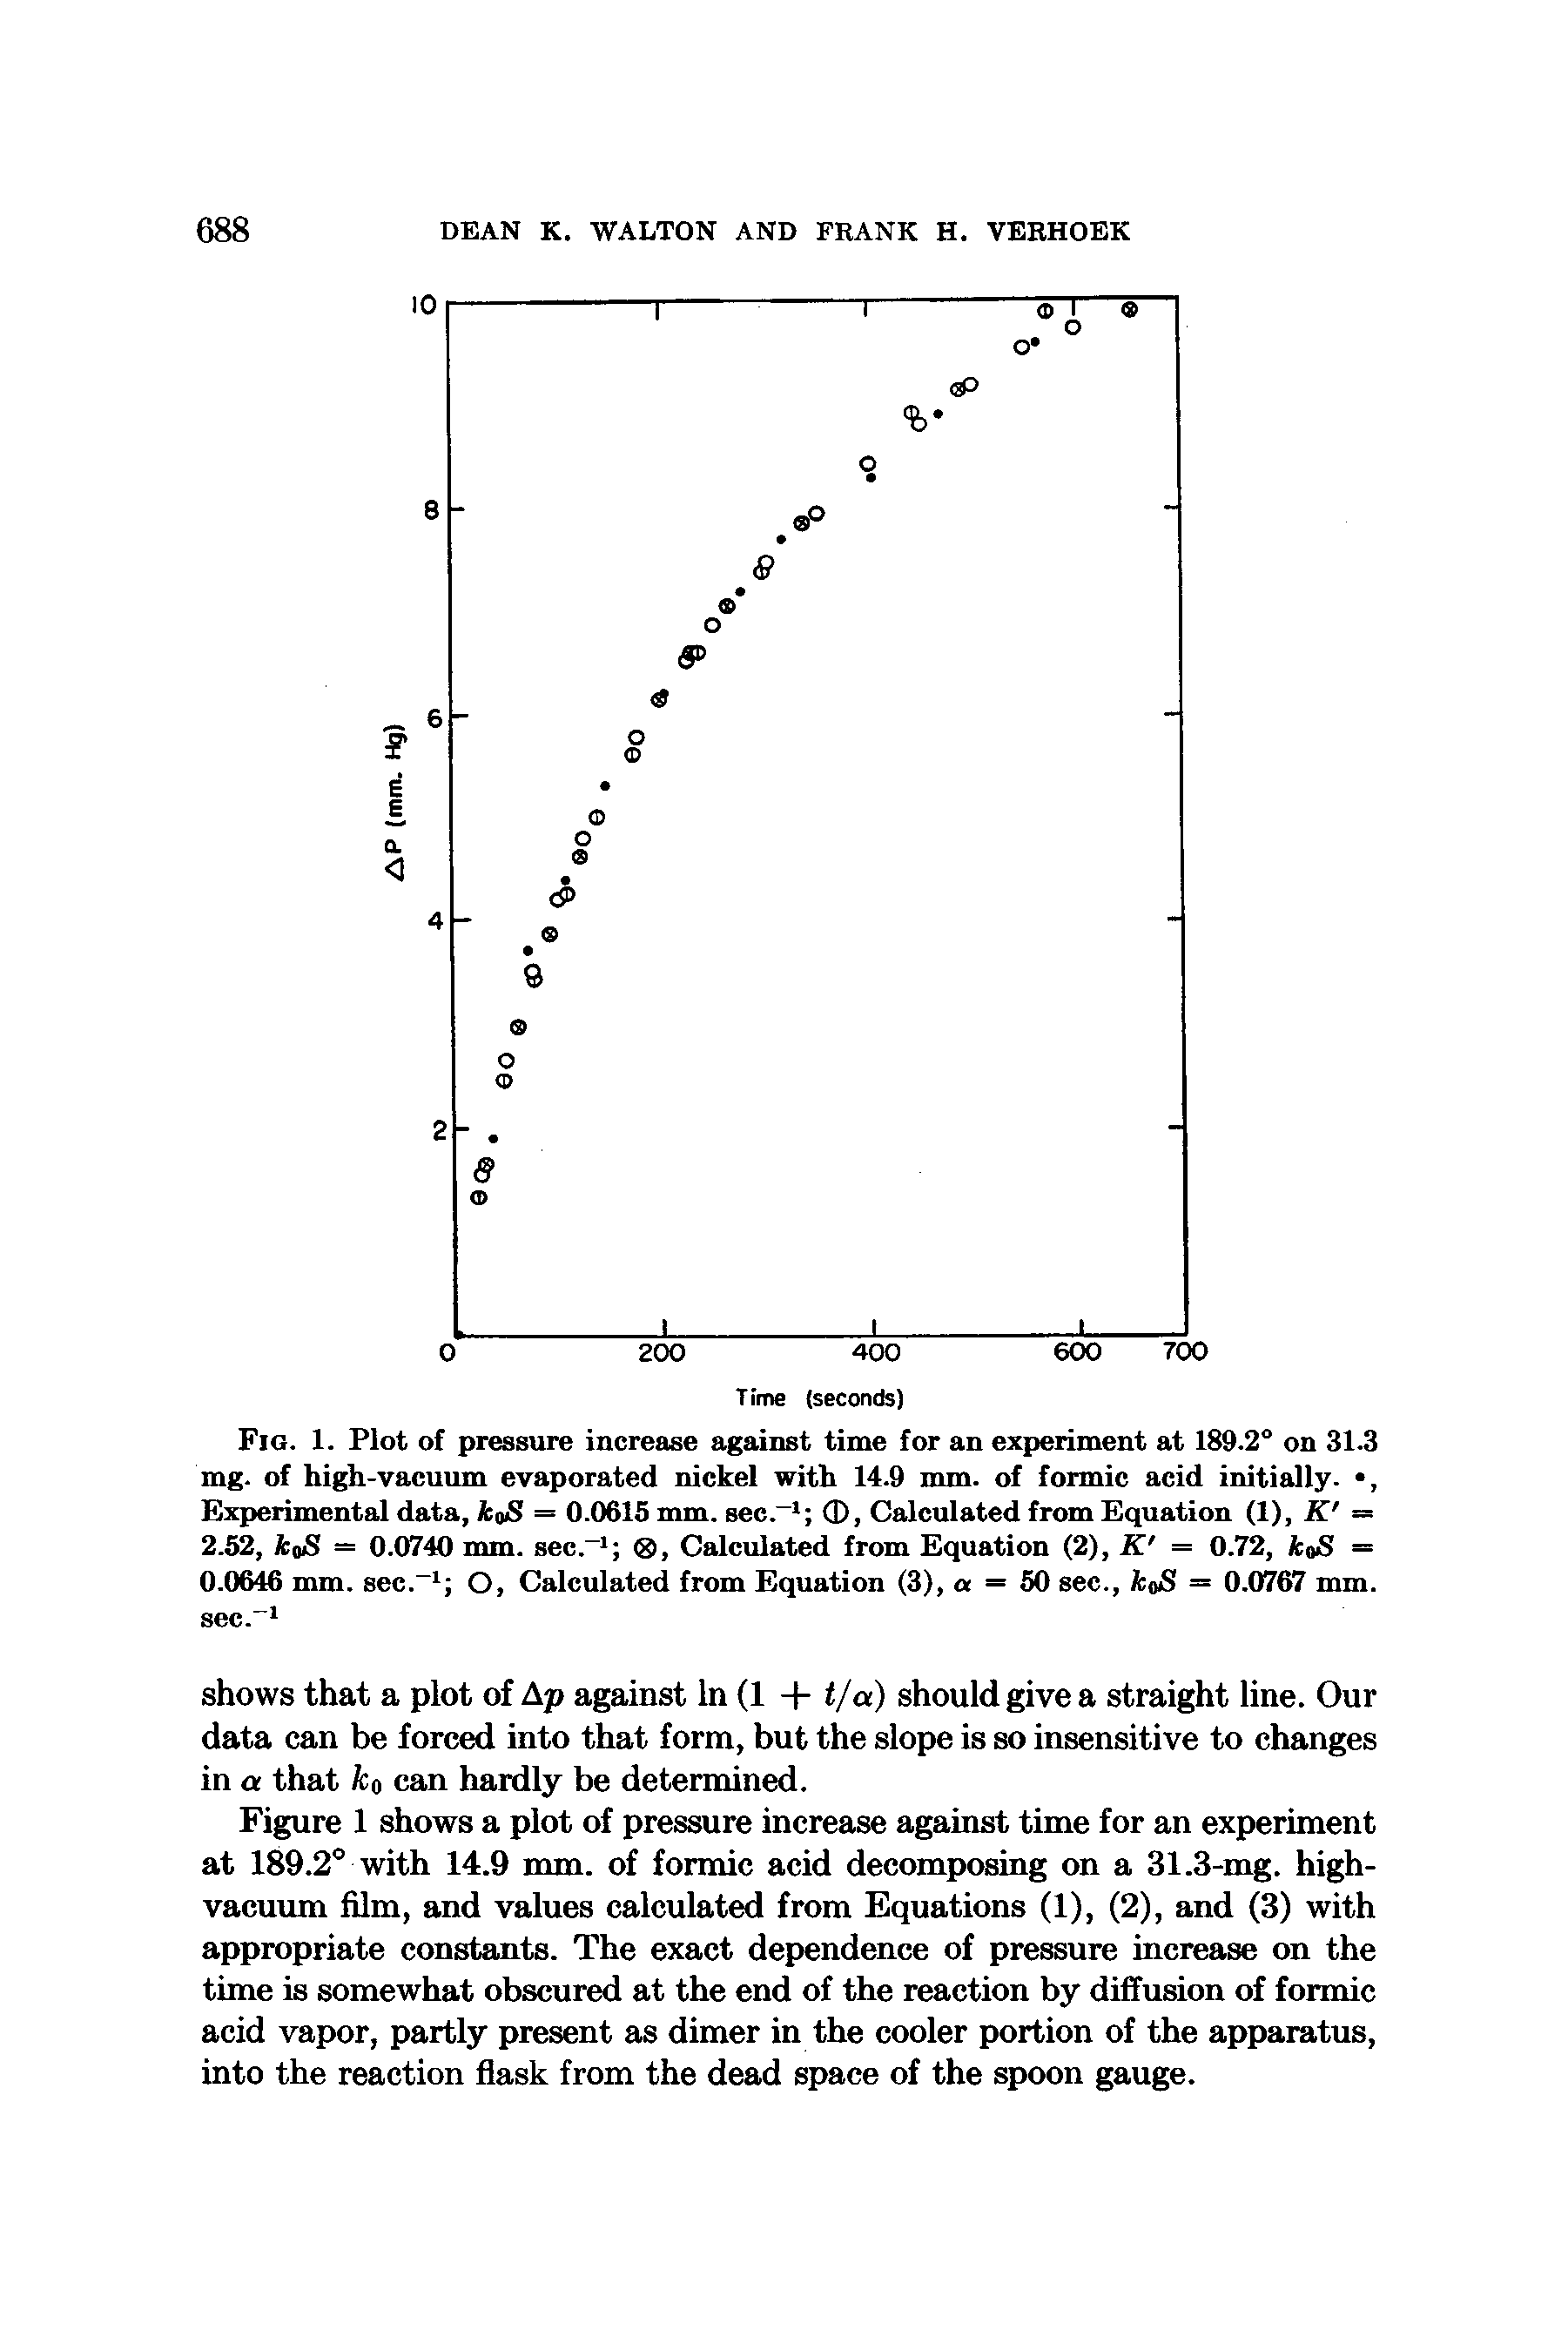 Fig. 1. Plot of pressure increase against time for an experiment at 189.2° on 31.3 mg. of high-vacuum evaporated nickel with 14.9 mm. of formic acid initially., Experimental data, koS = 0.0615 mm. sec. , Calculated from Equation (1), K = 2.52, fcoS = 0.0740 mm. sec. (g). Calculated from Equation (2), K = 0.72, koS = 0.0646 mm. sec. O, Calculated from Equation (3), a = 50 sec., fcoS = 0.0767 mm. sec." ...